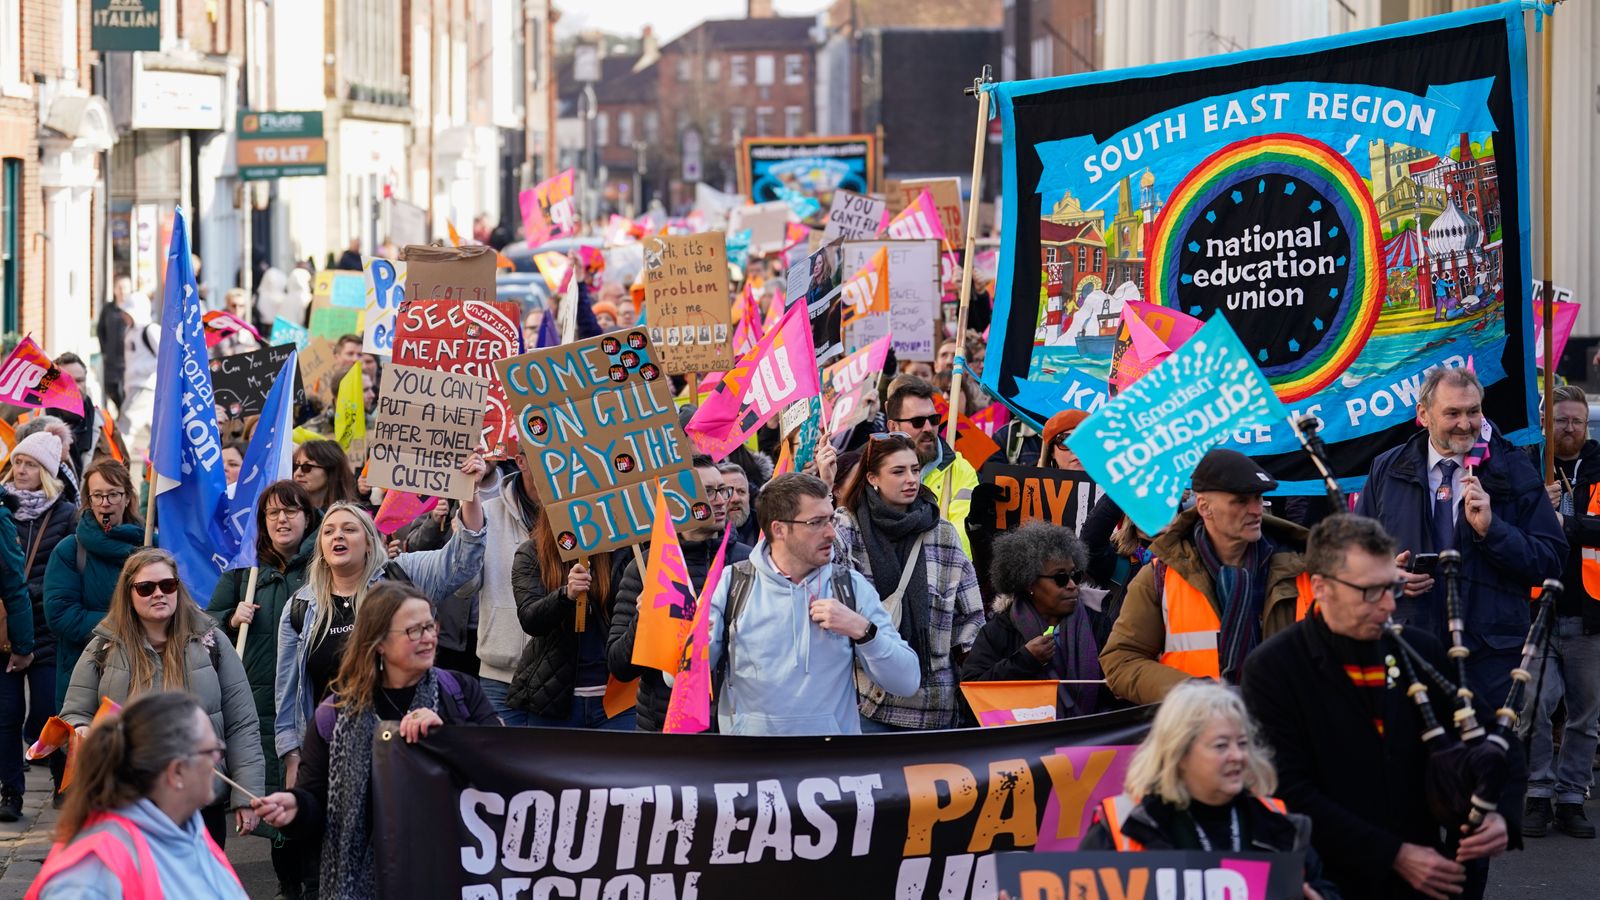 UK loses total of 220,000 working days to strike action in January